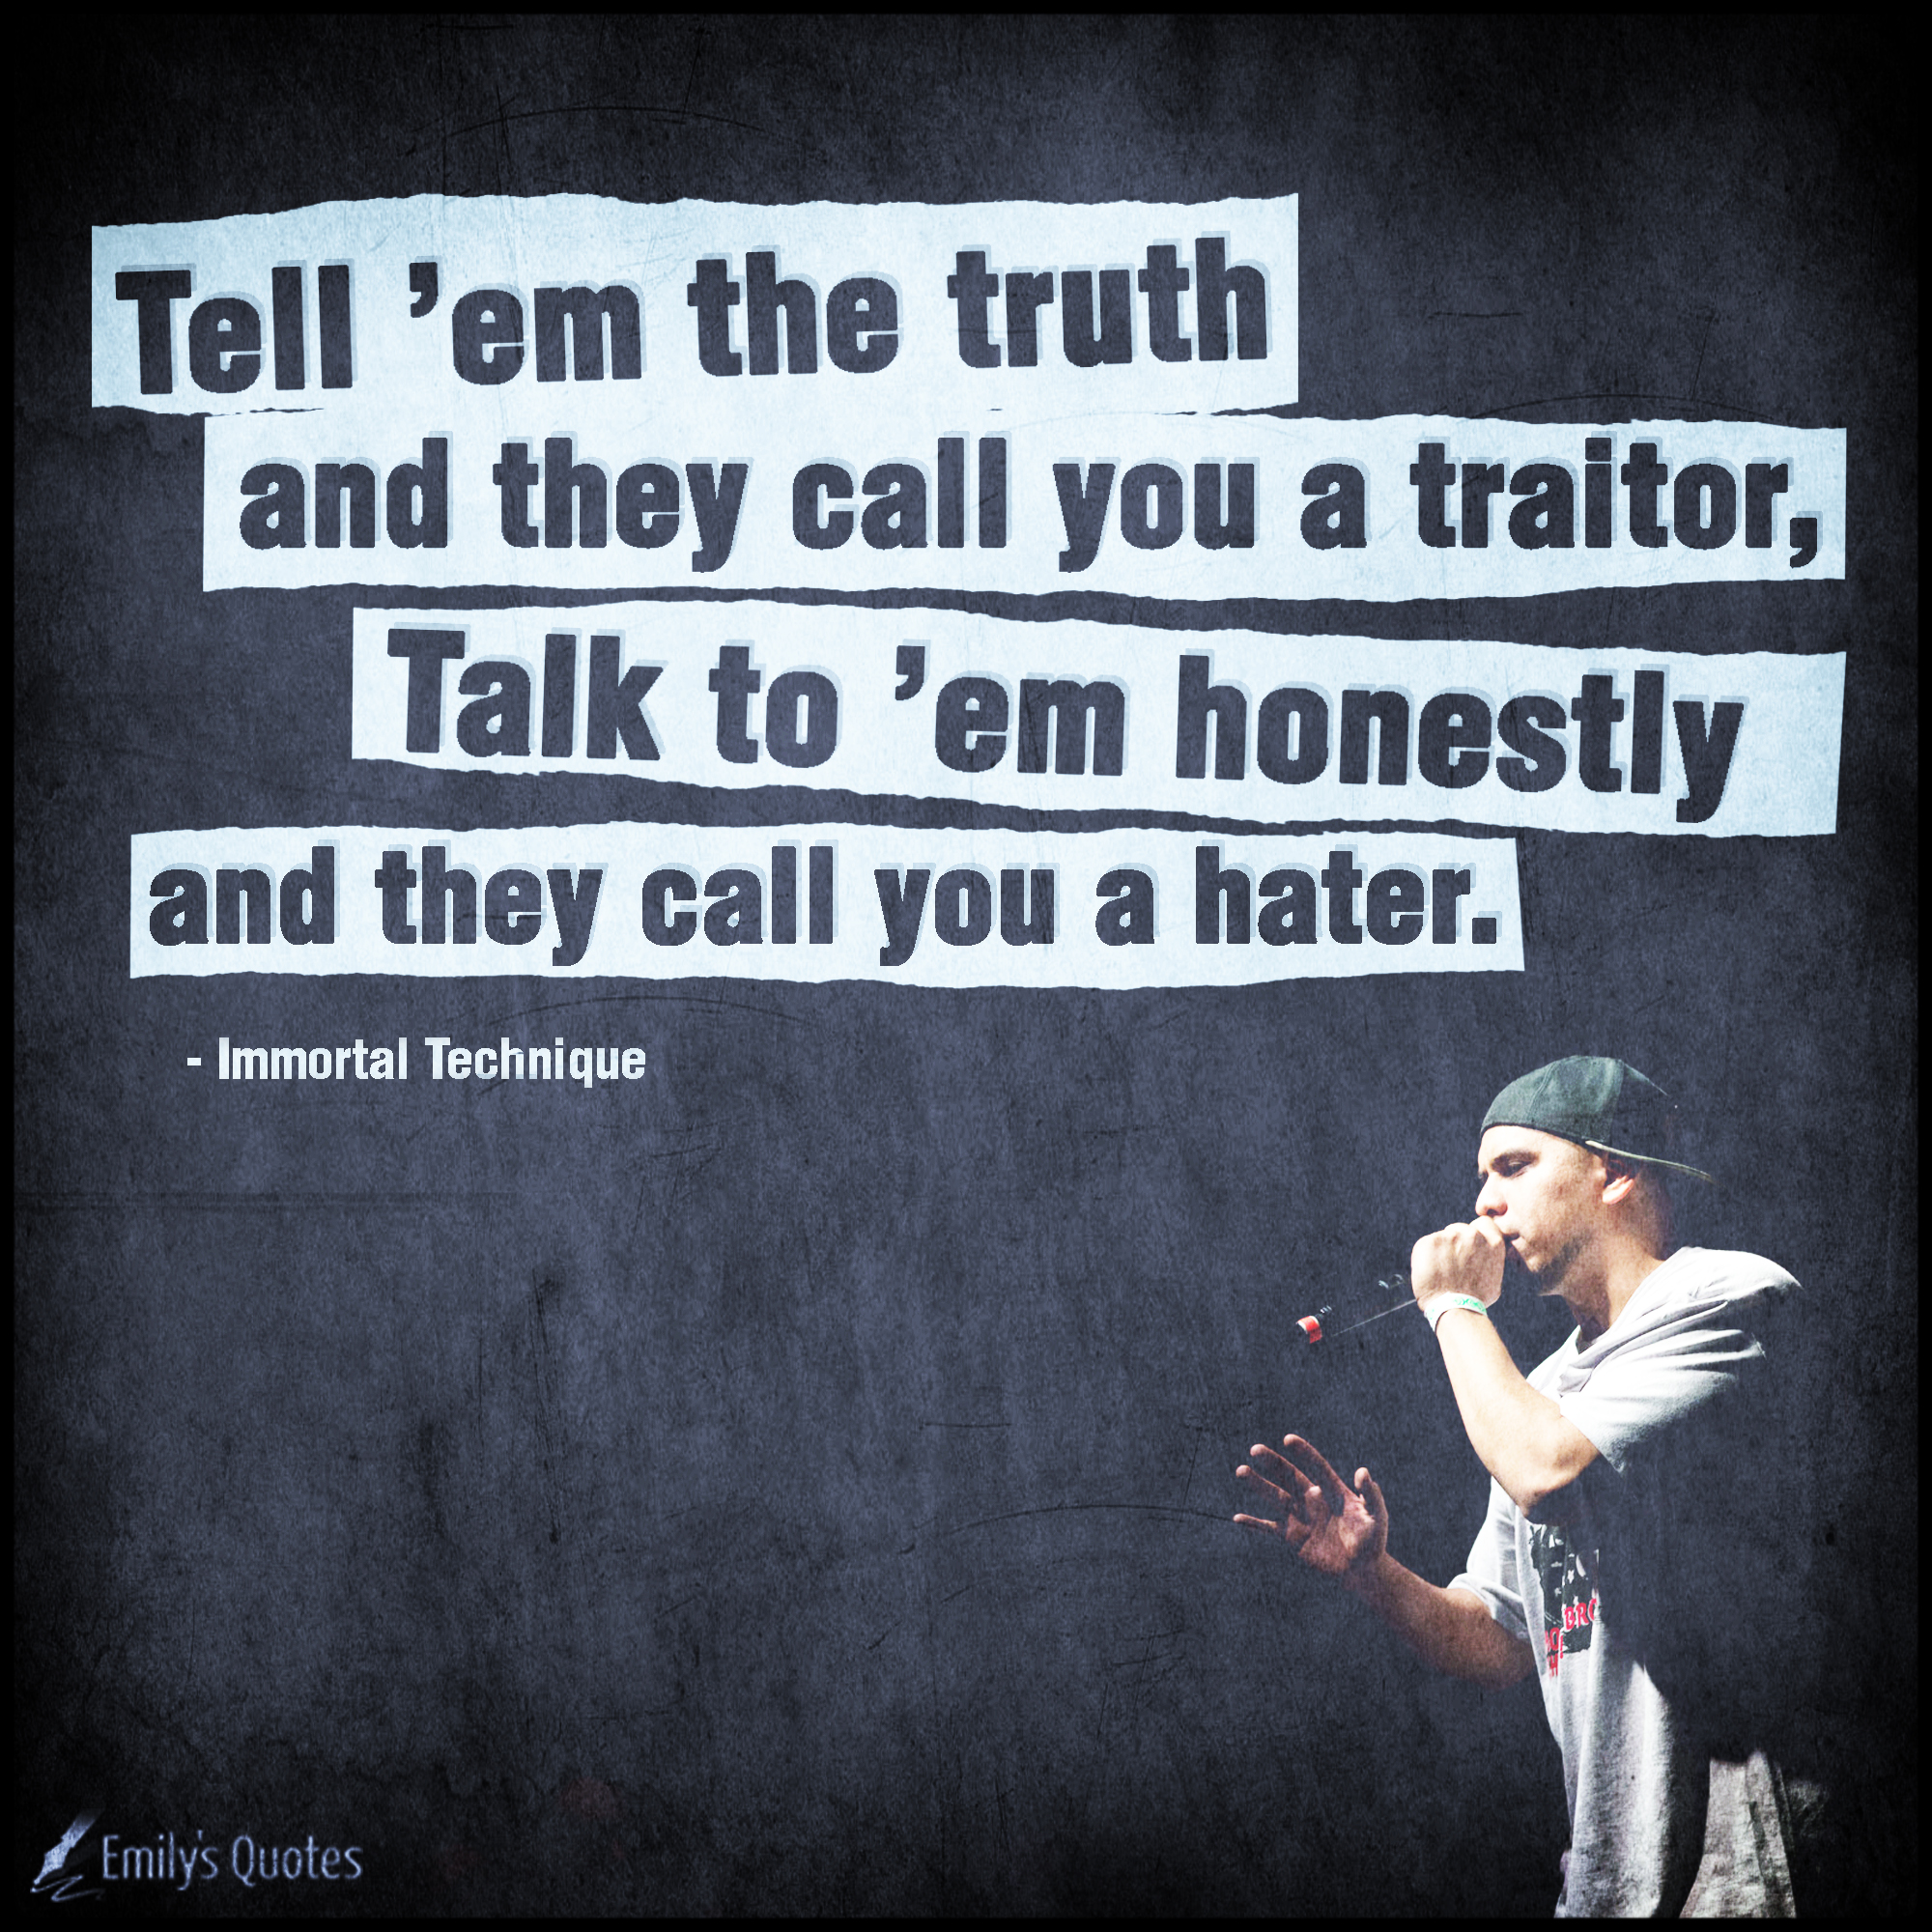 Tell ’em the truth and they call you a traitor